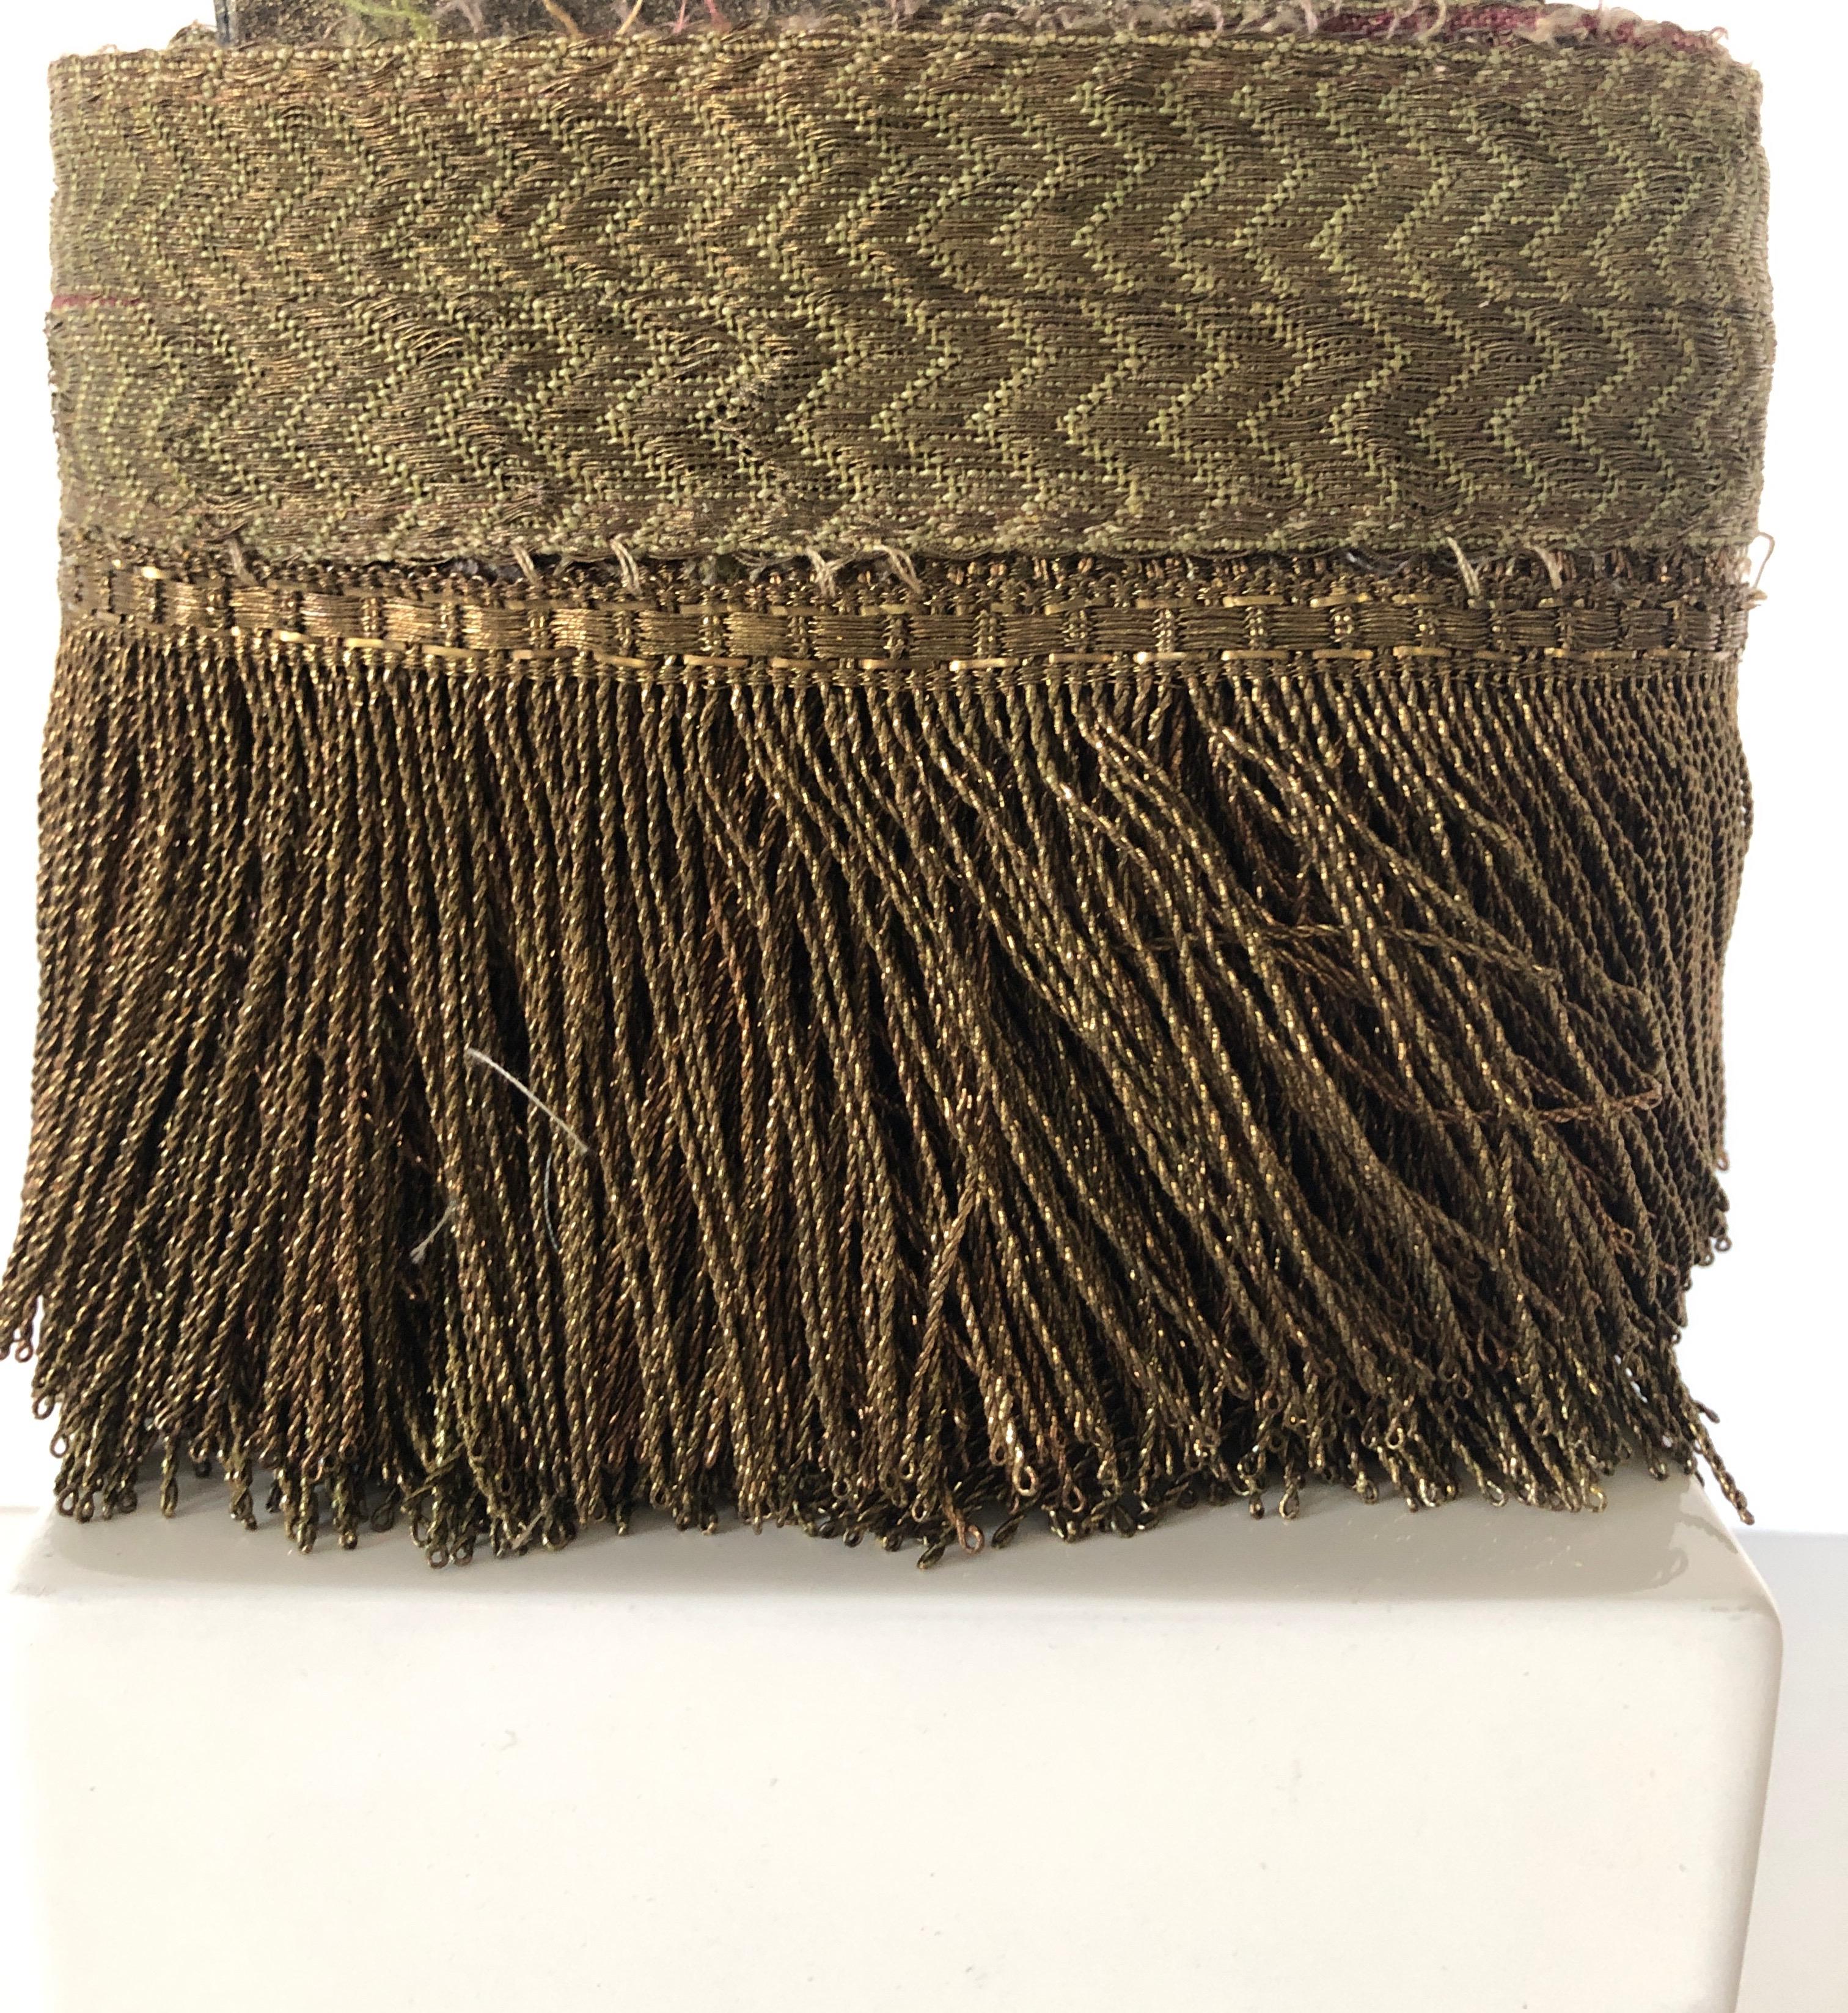 Gold Metallic Threads Antique Trim and Fringe.
Green and gold metallic fringes antique trim lot (two)
Sold as is.
Ideal for pillows and upholstery.
Sizes: 153